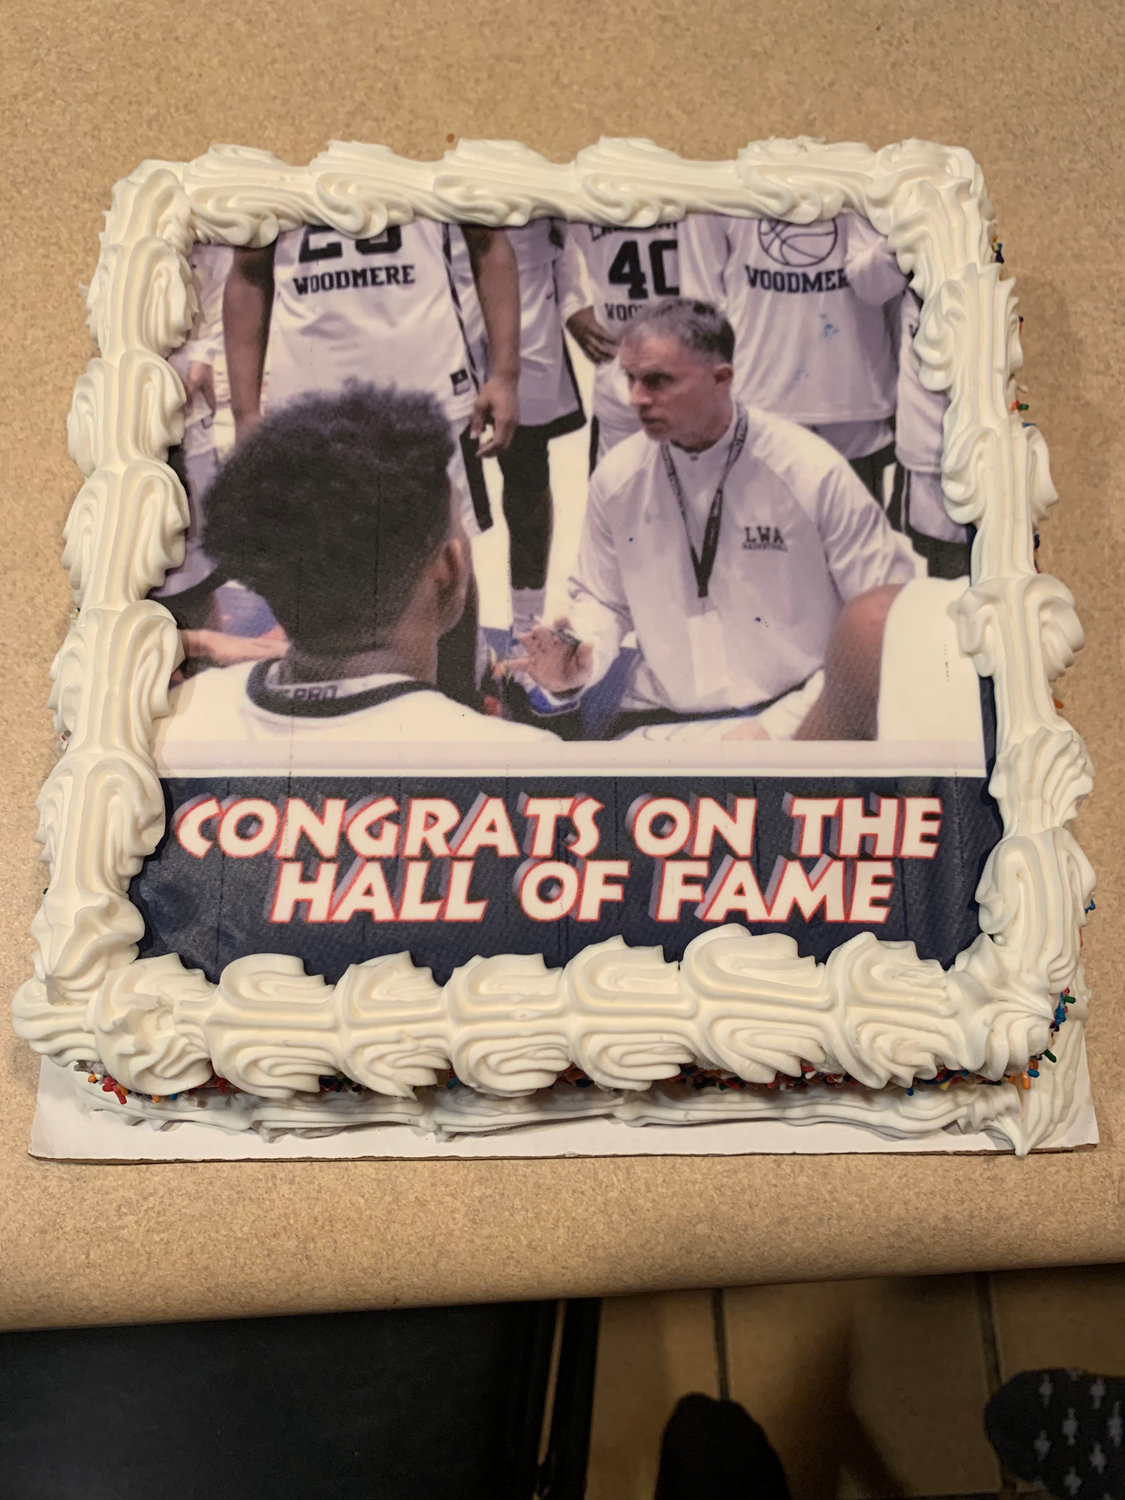 Being inducted into the Nassau County Athletics Hall of Fame was just icing on the cake baked by Weiss’s wife, Andrea.